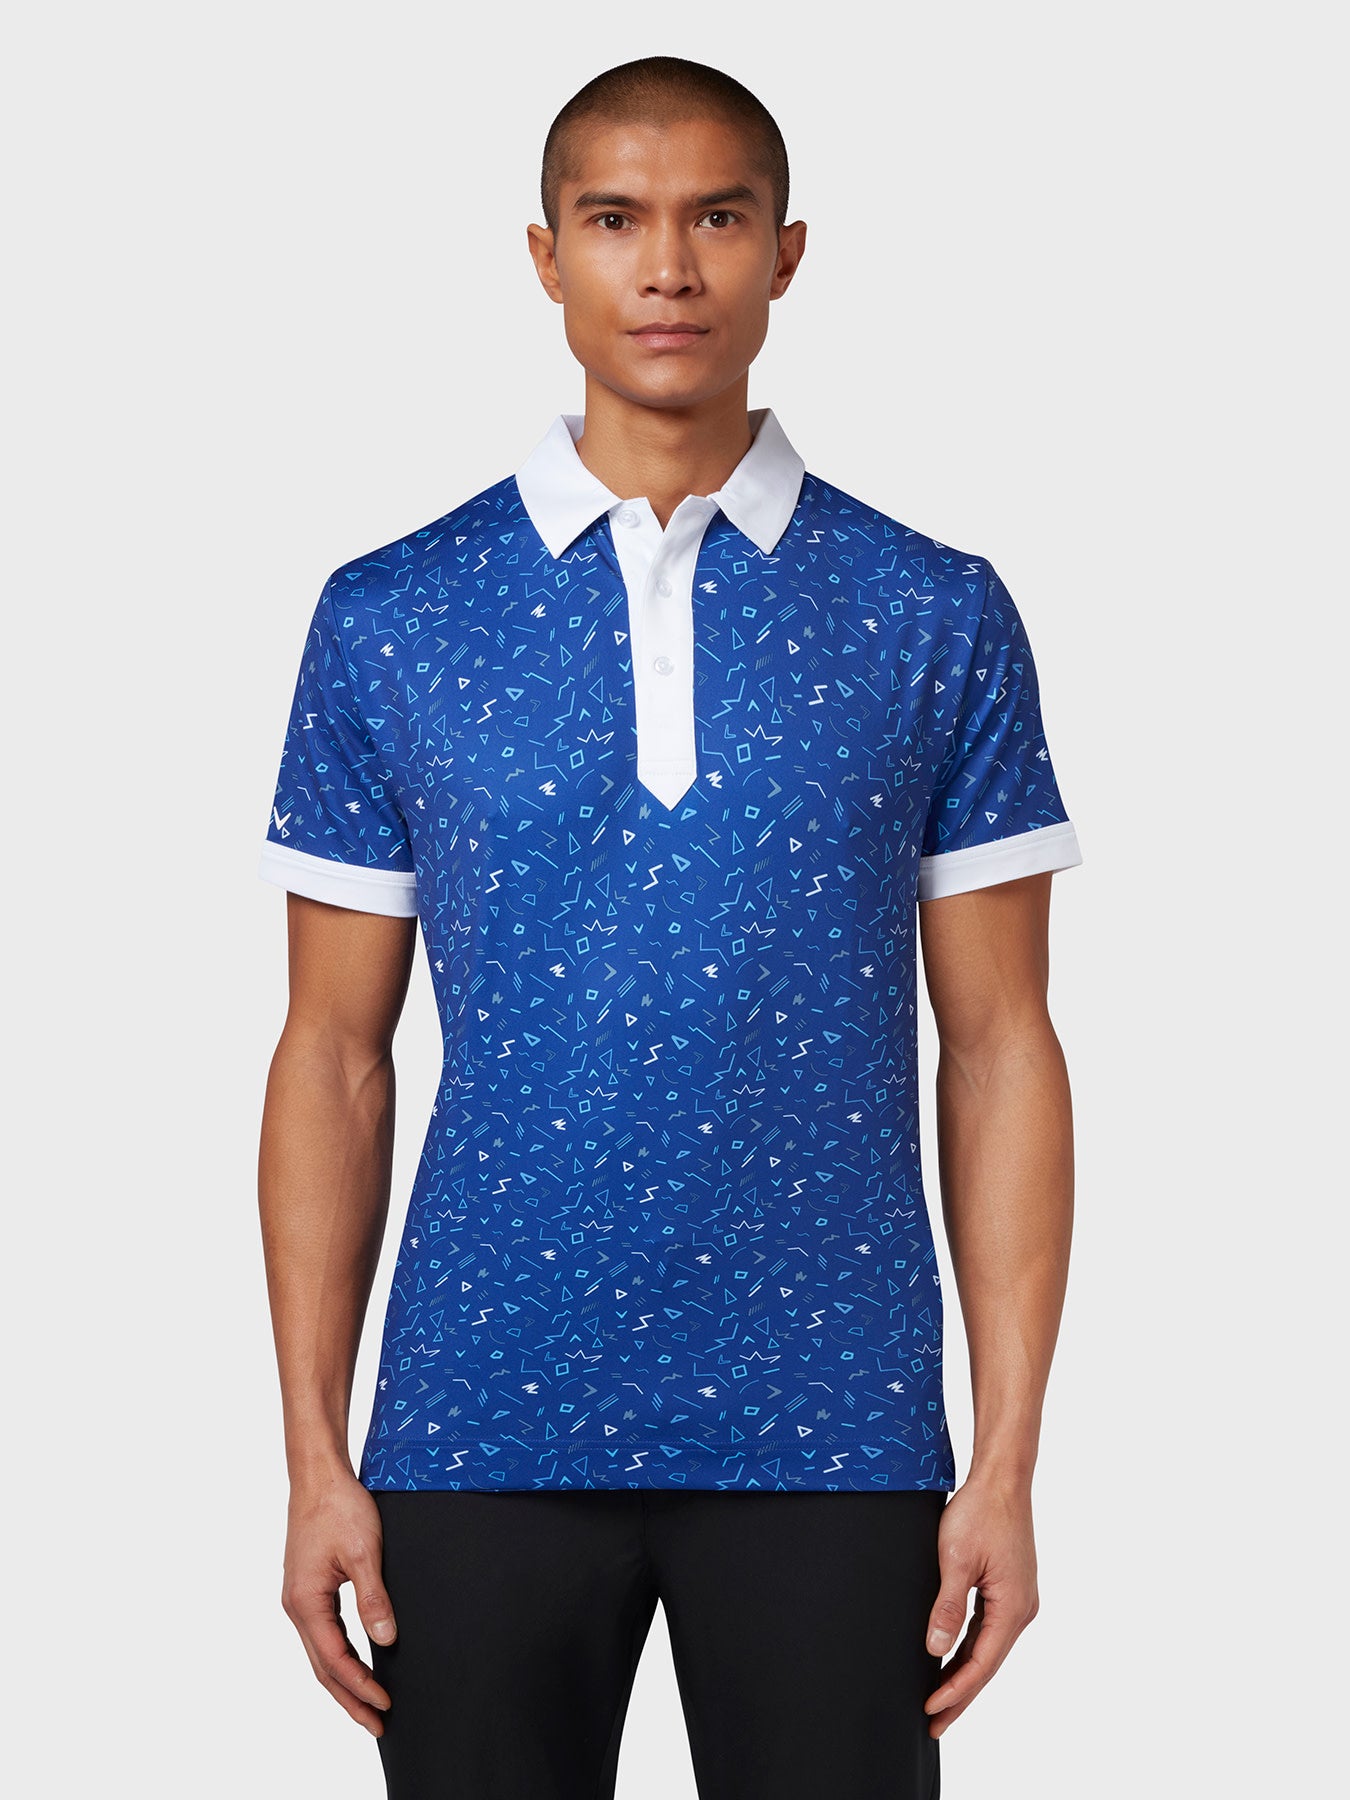 View X Series Chev Memphis All Over Print Polo In Clematis Blue information